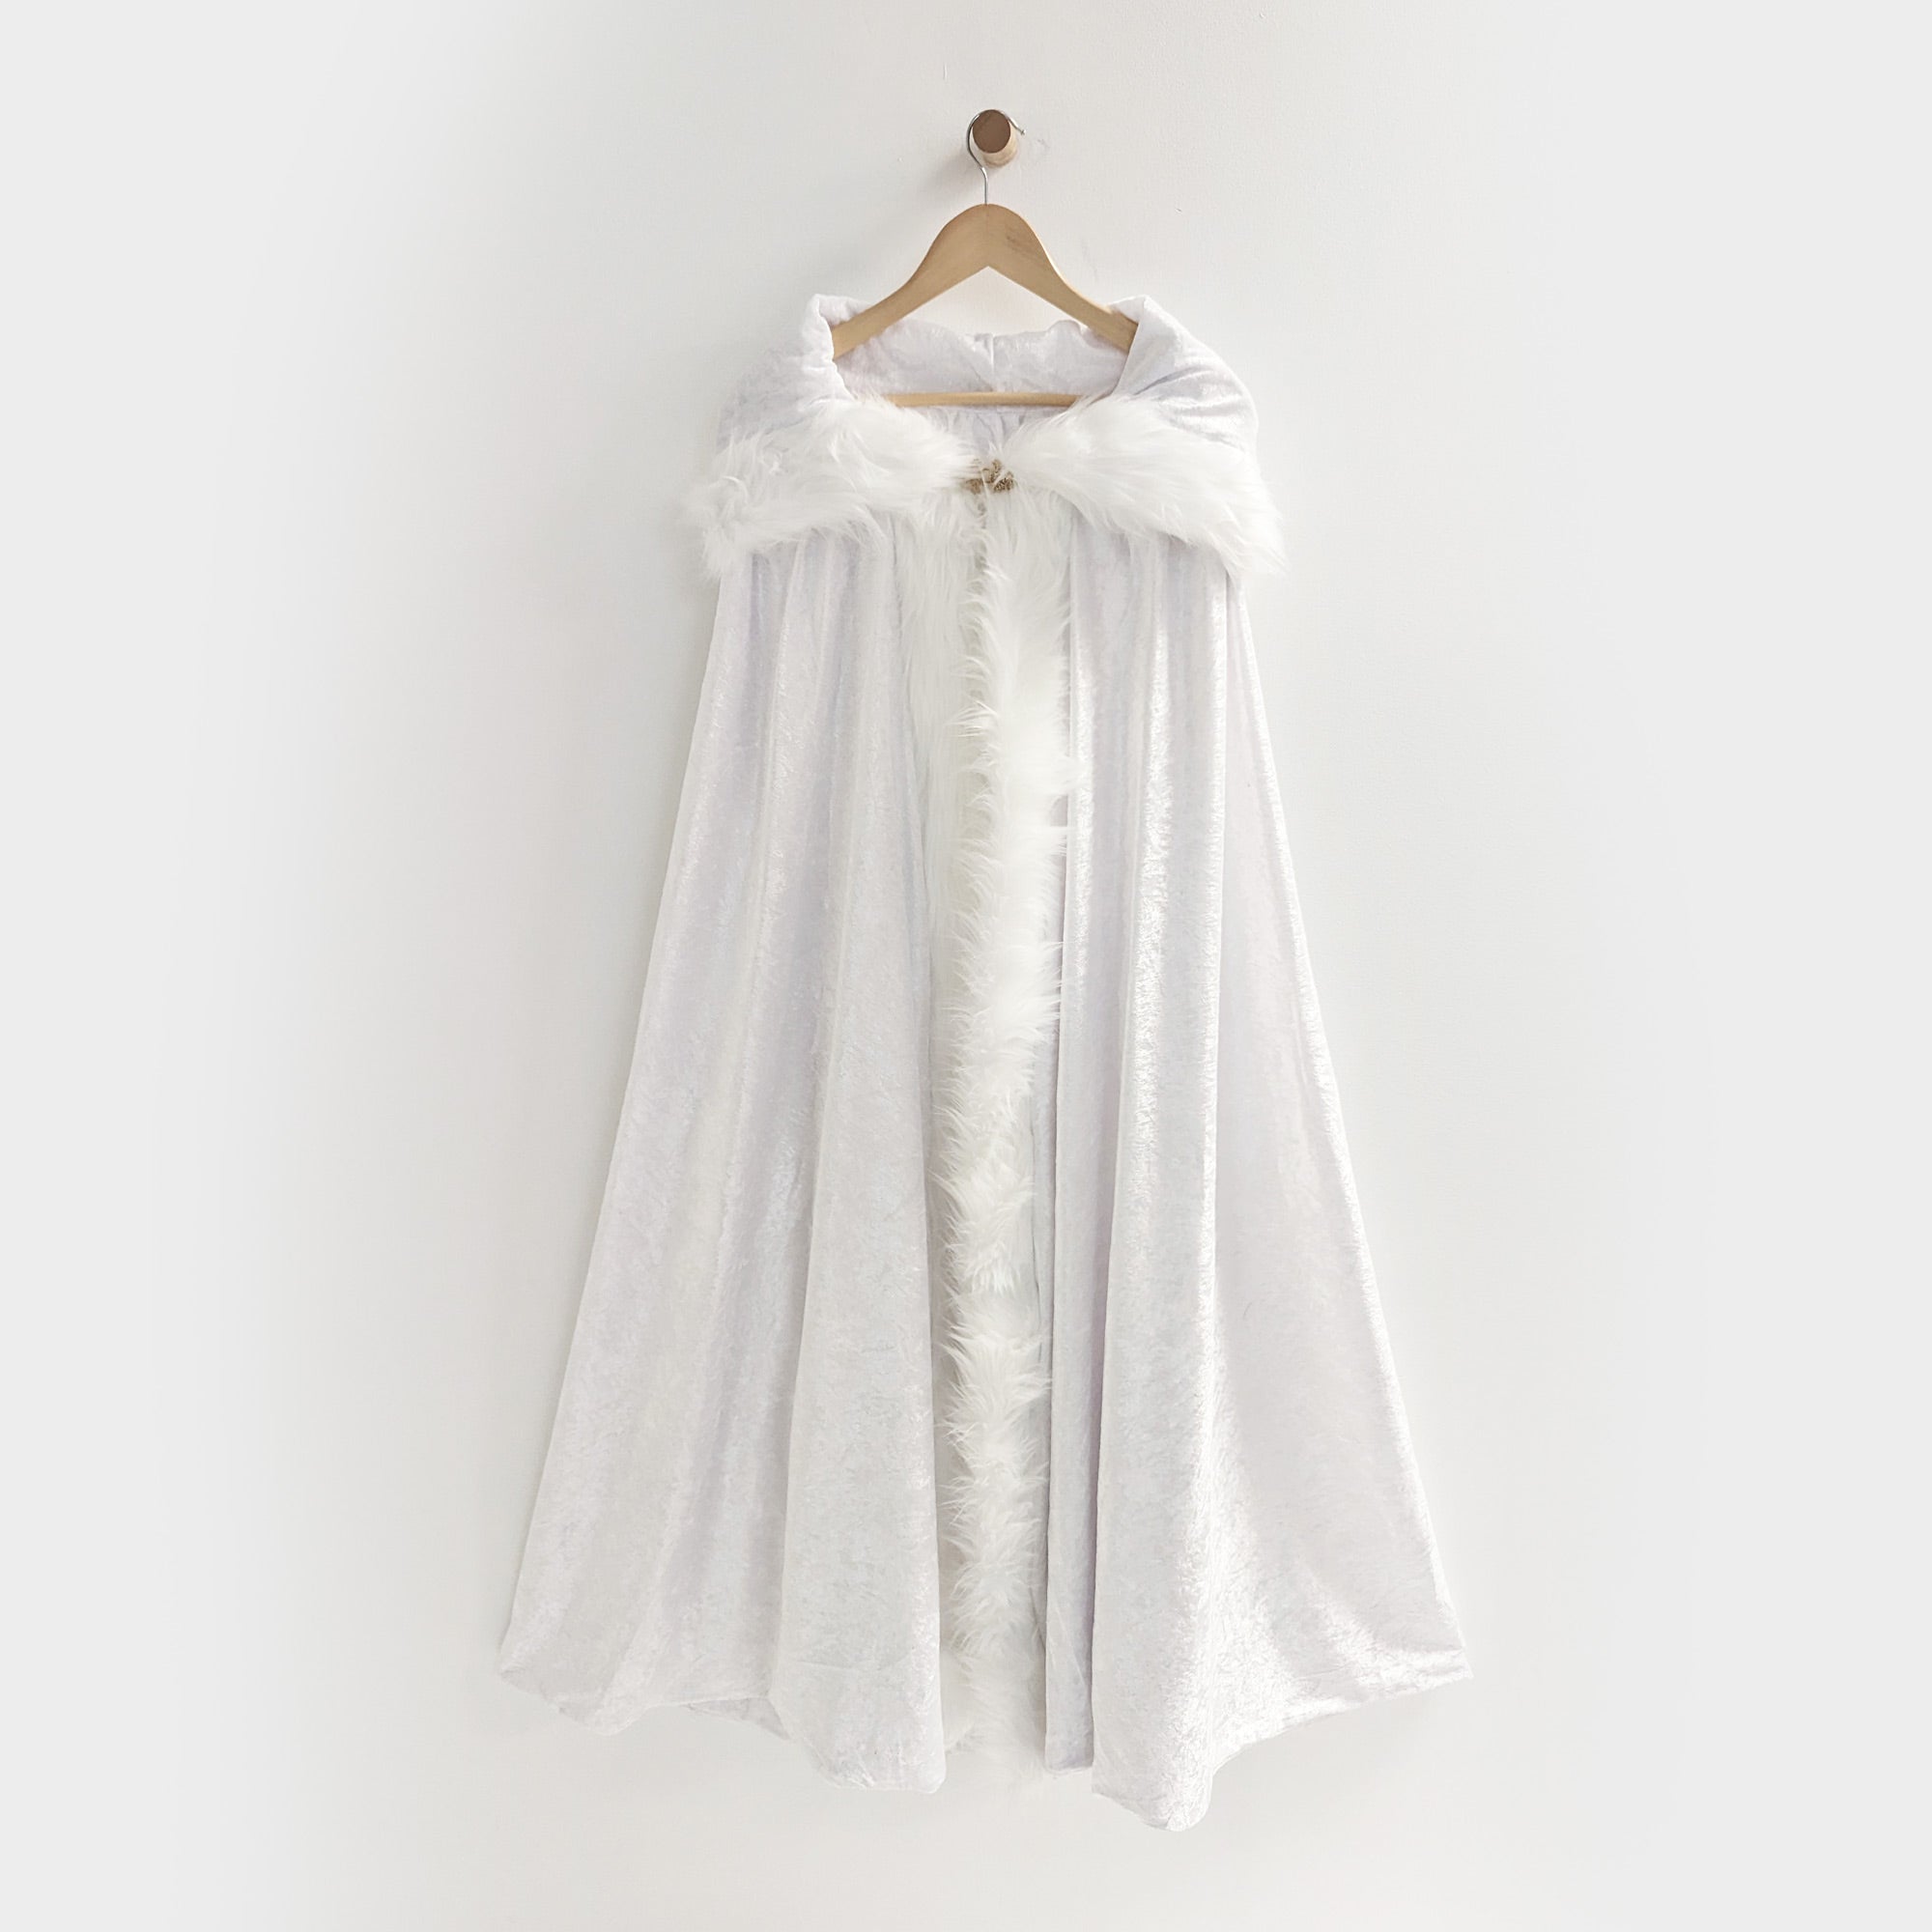 Everfan White Cloak with Large Hood, White Faux Fur Trim, and Metal Clasp Small (Kids - 30 Long)